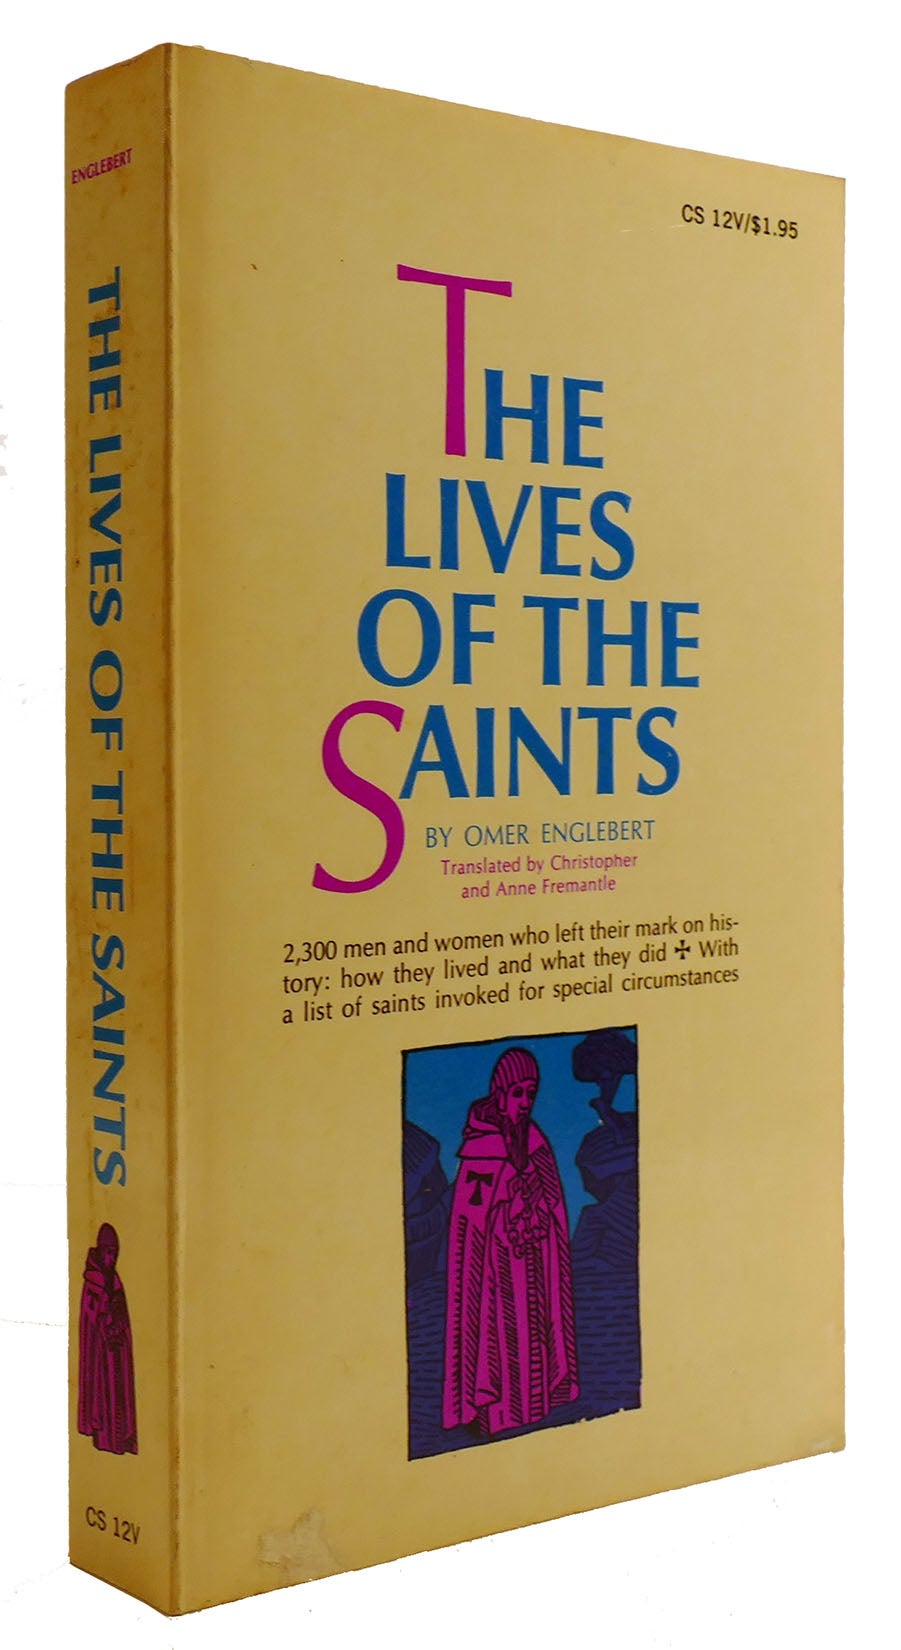 Printing　THE　Englebert　Omer　OF　SAINTS　LIVES　THE　First　First　Edition;